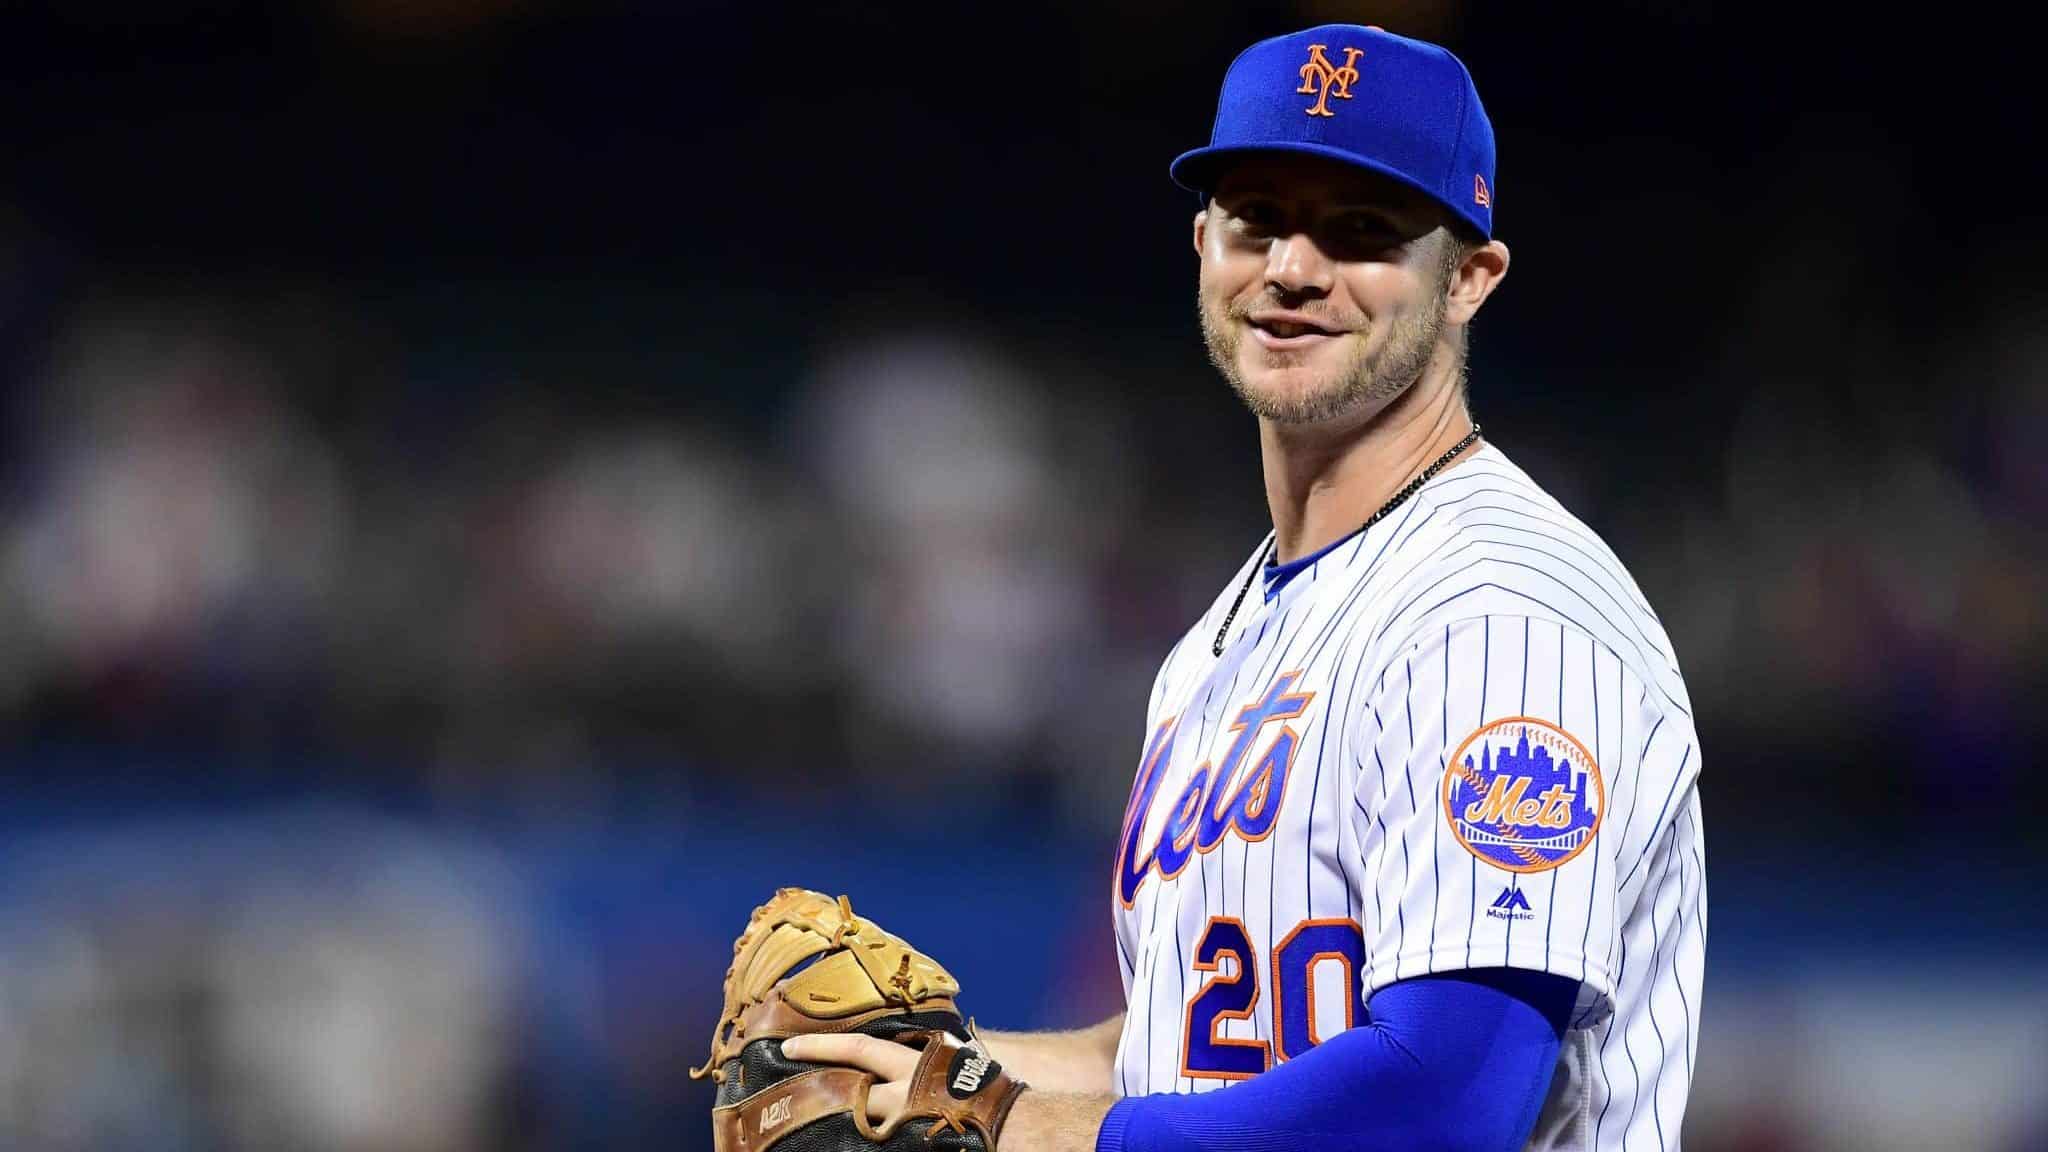 NEW YORK, NEW YORK - SEPTEMBER 26: Pete Alonso #20 of the New York Mets smiles in the third inning of their game against the Miami Marlins at Citi Field on September 26, 2019 in the Flushing neighborhood of the Queens borough in New York City.